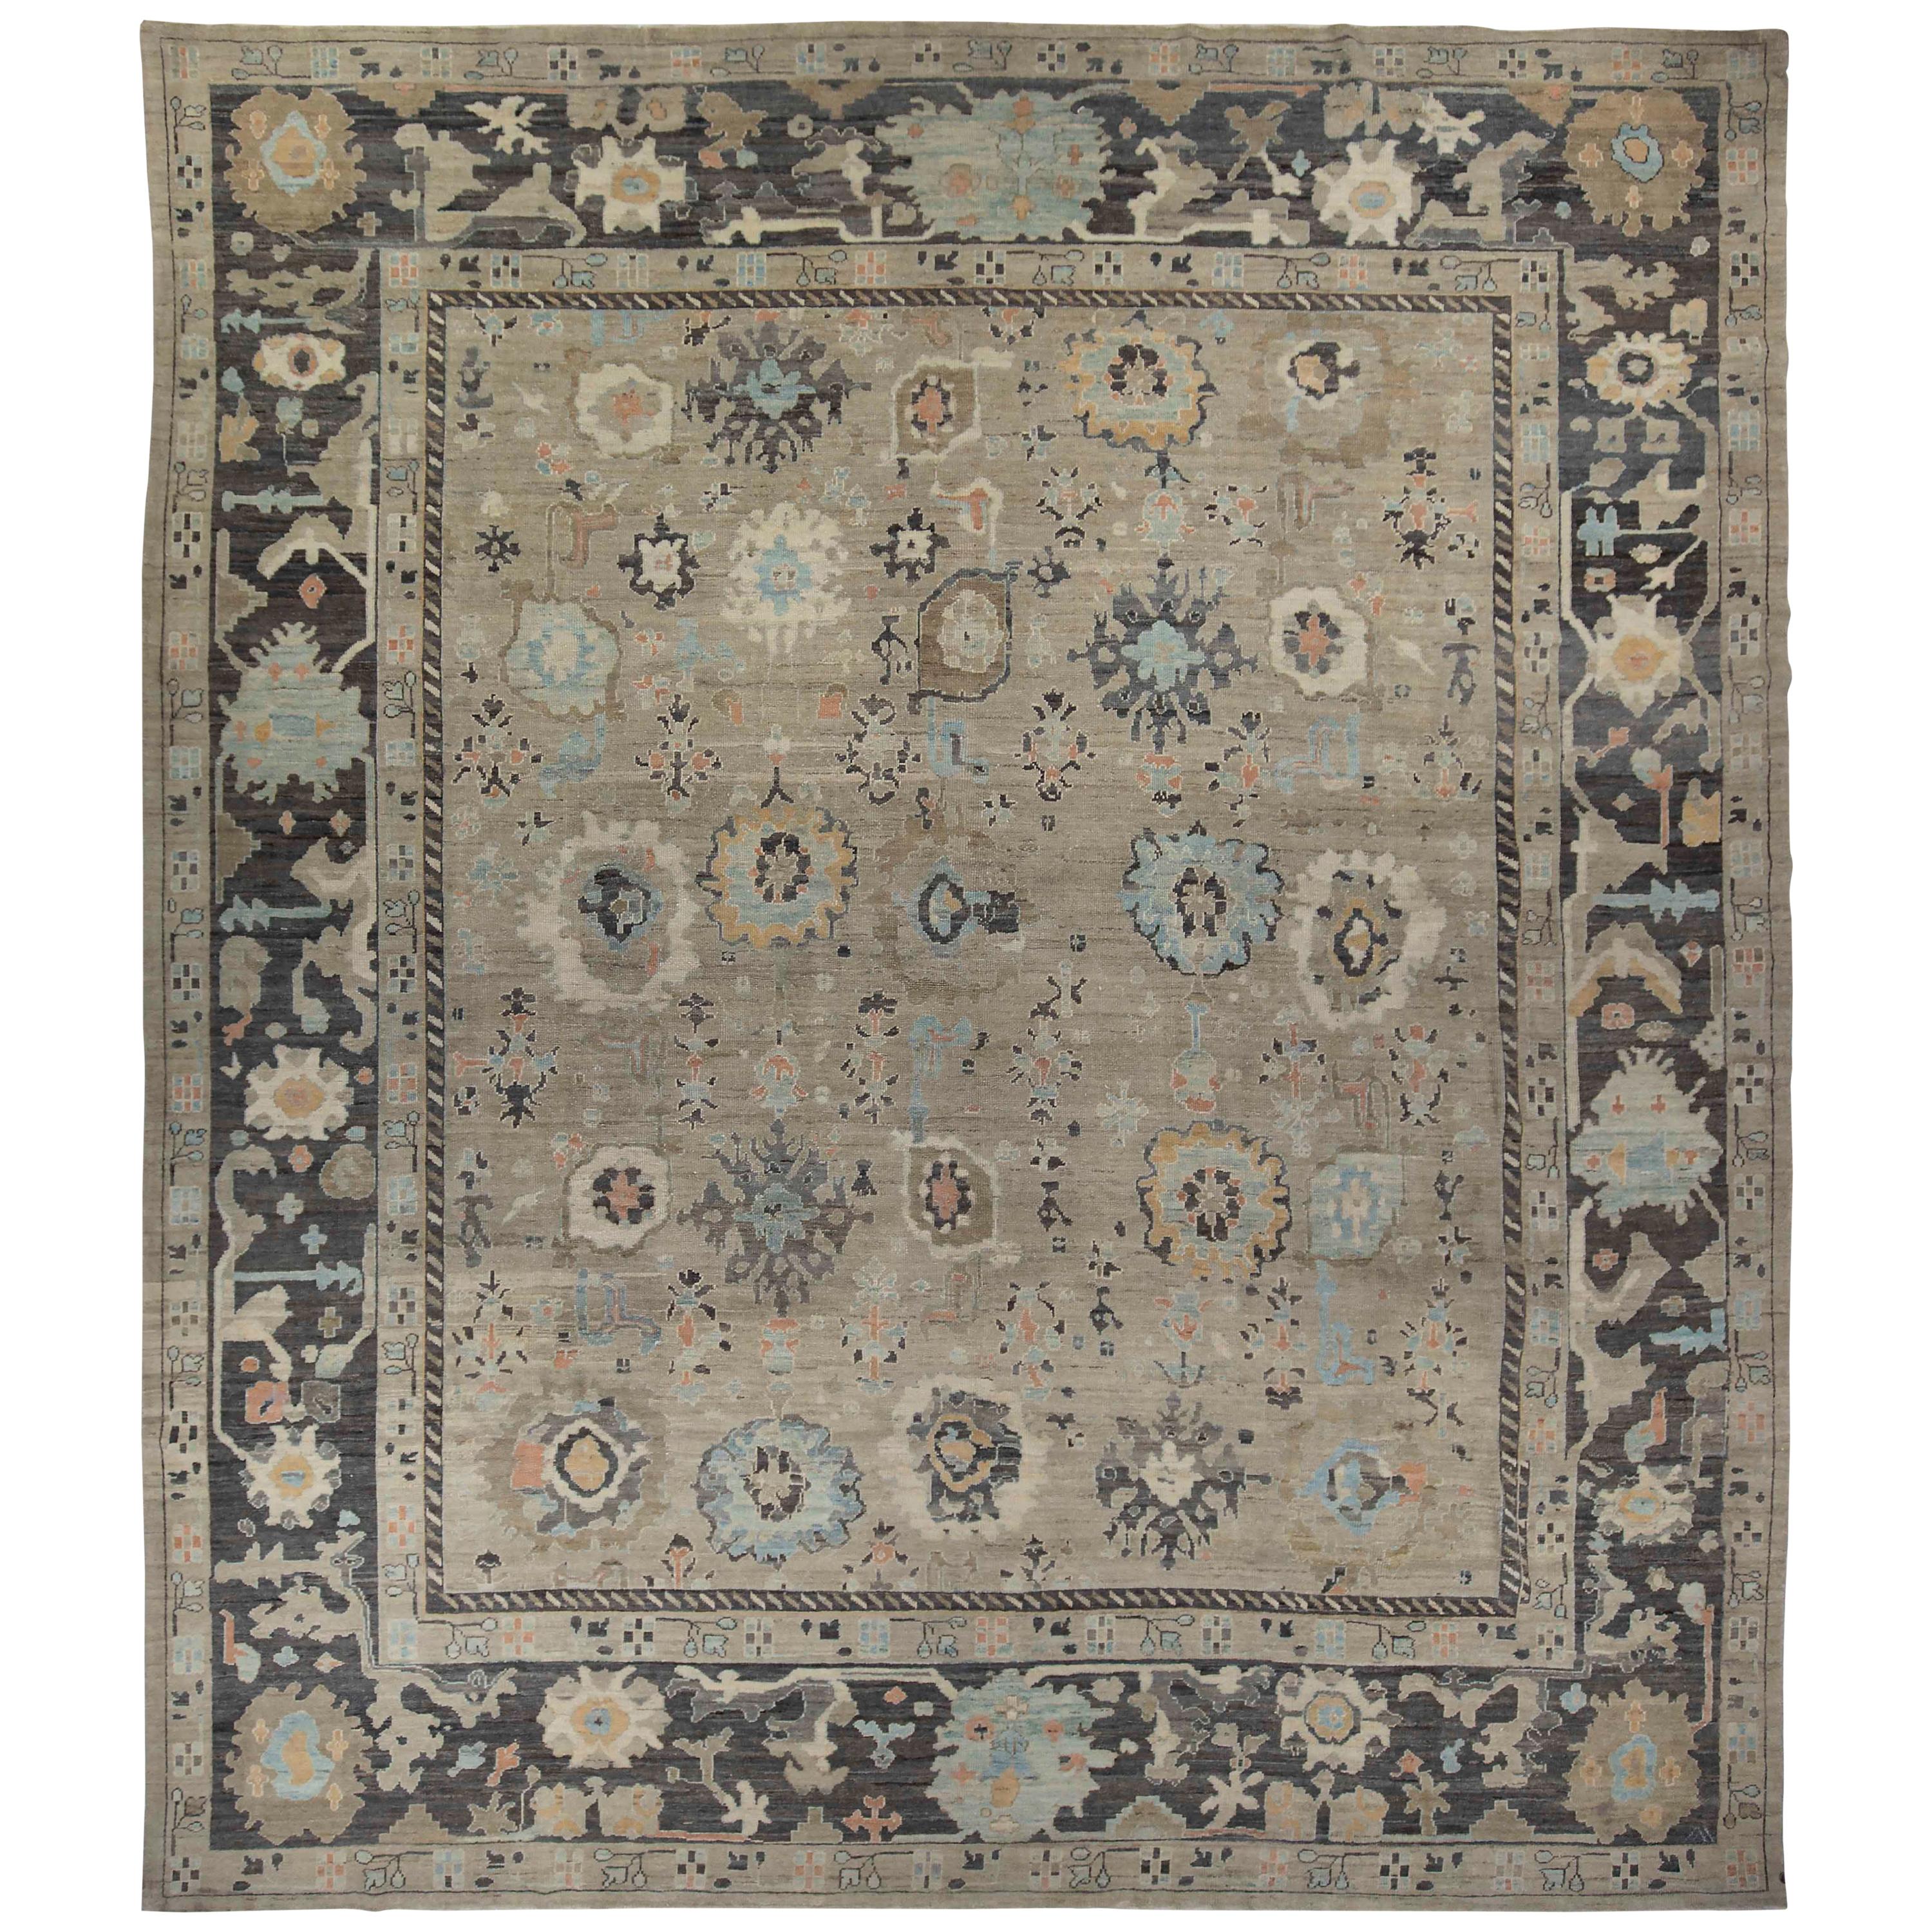 New Turkish Oushak Rug with Blue and Brown Floral Details on Beige Field For Sale